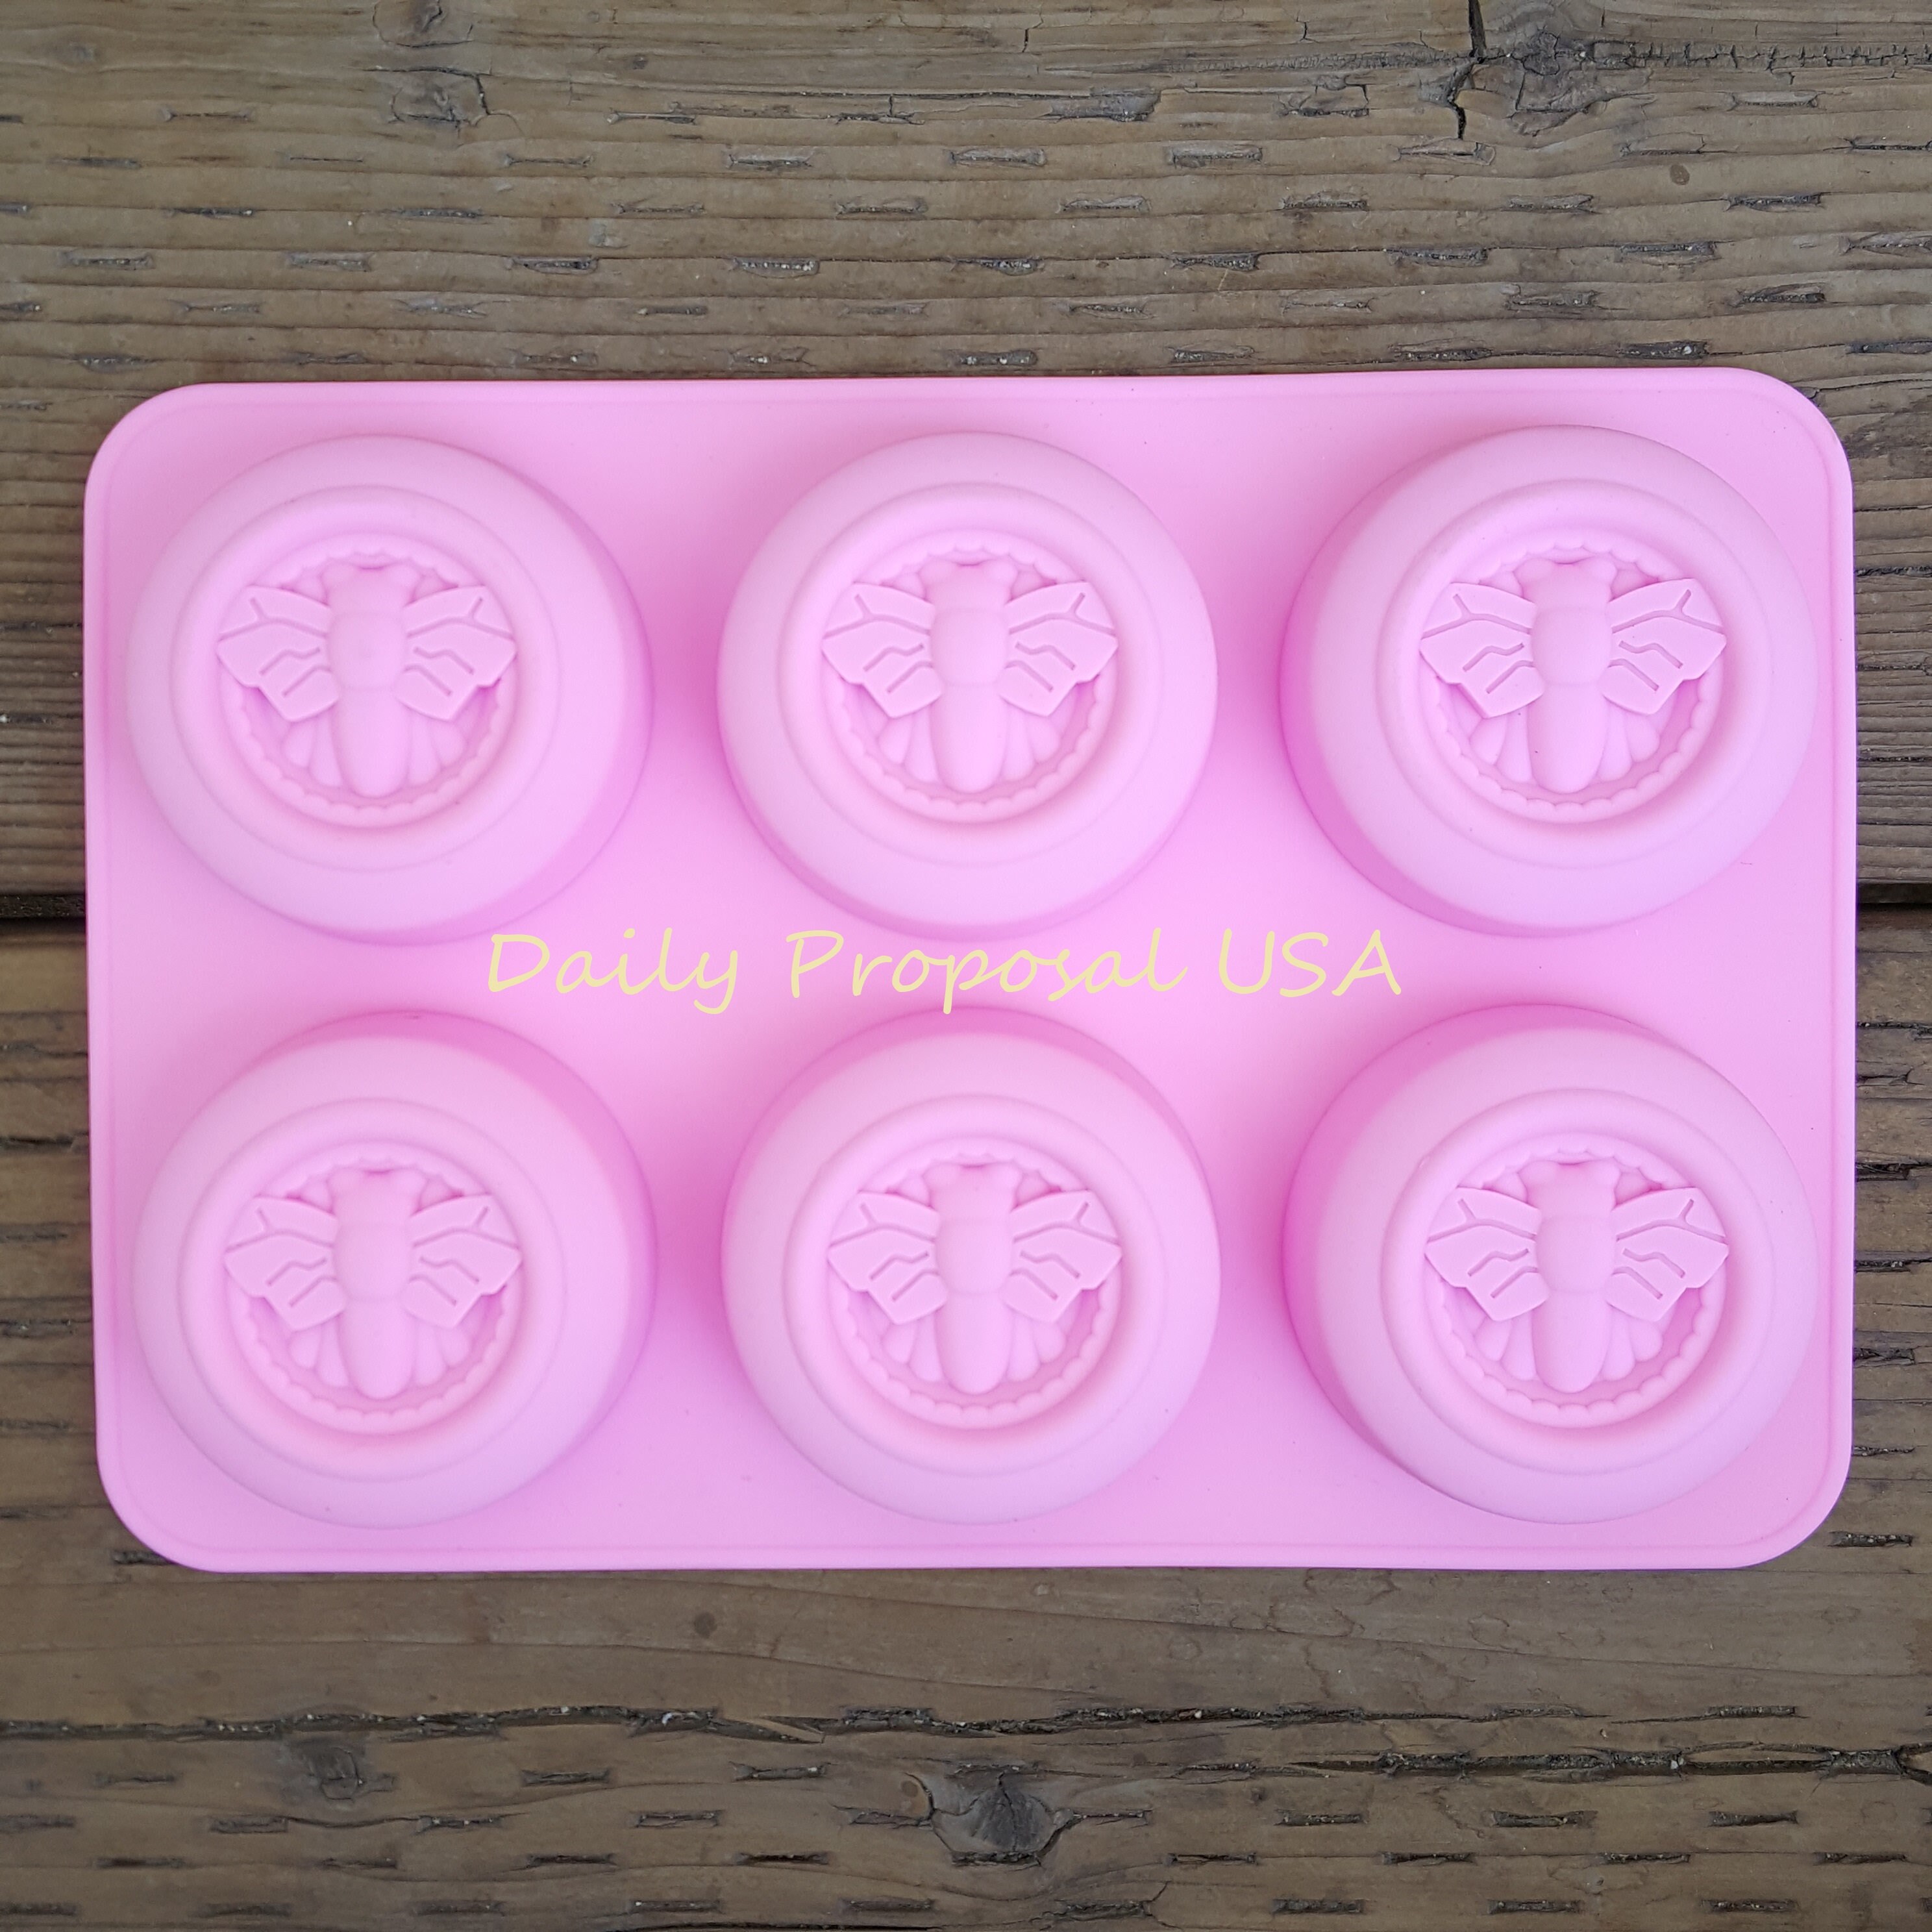 Halloween Star Wars Ice Cube Tray Silicone Mold Chocolate Stormtrooper Mould